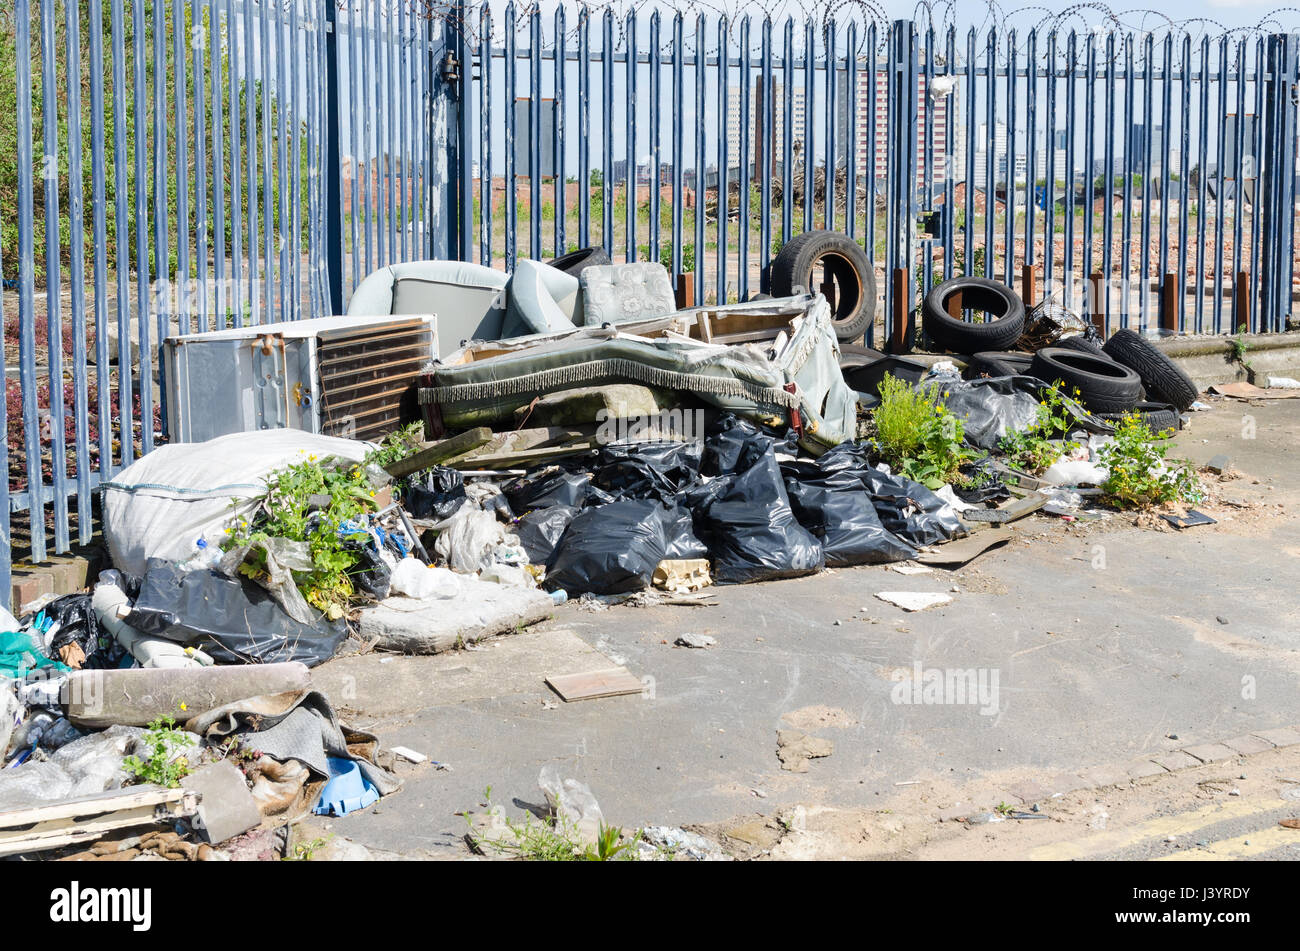 Pile of rubbish resulting from fly tipping including car tyres and sofa Stock Photo